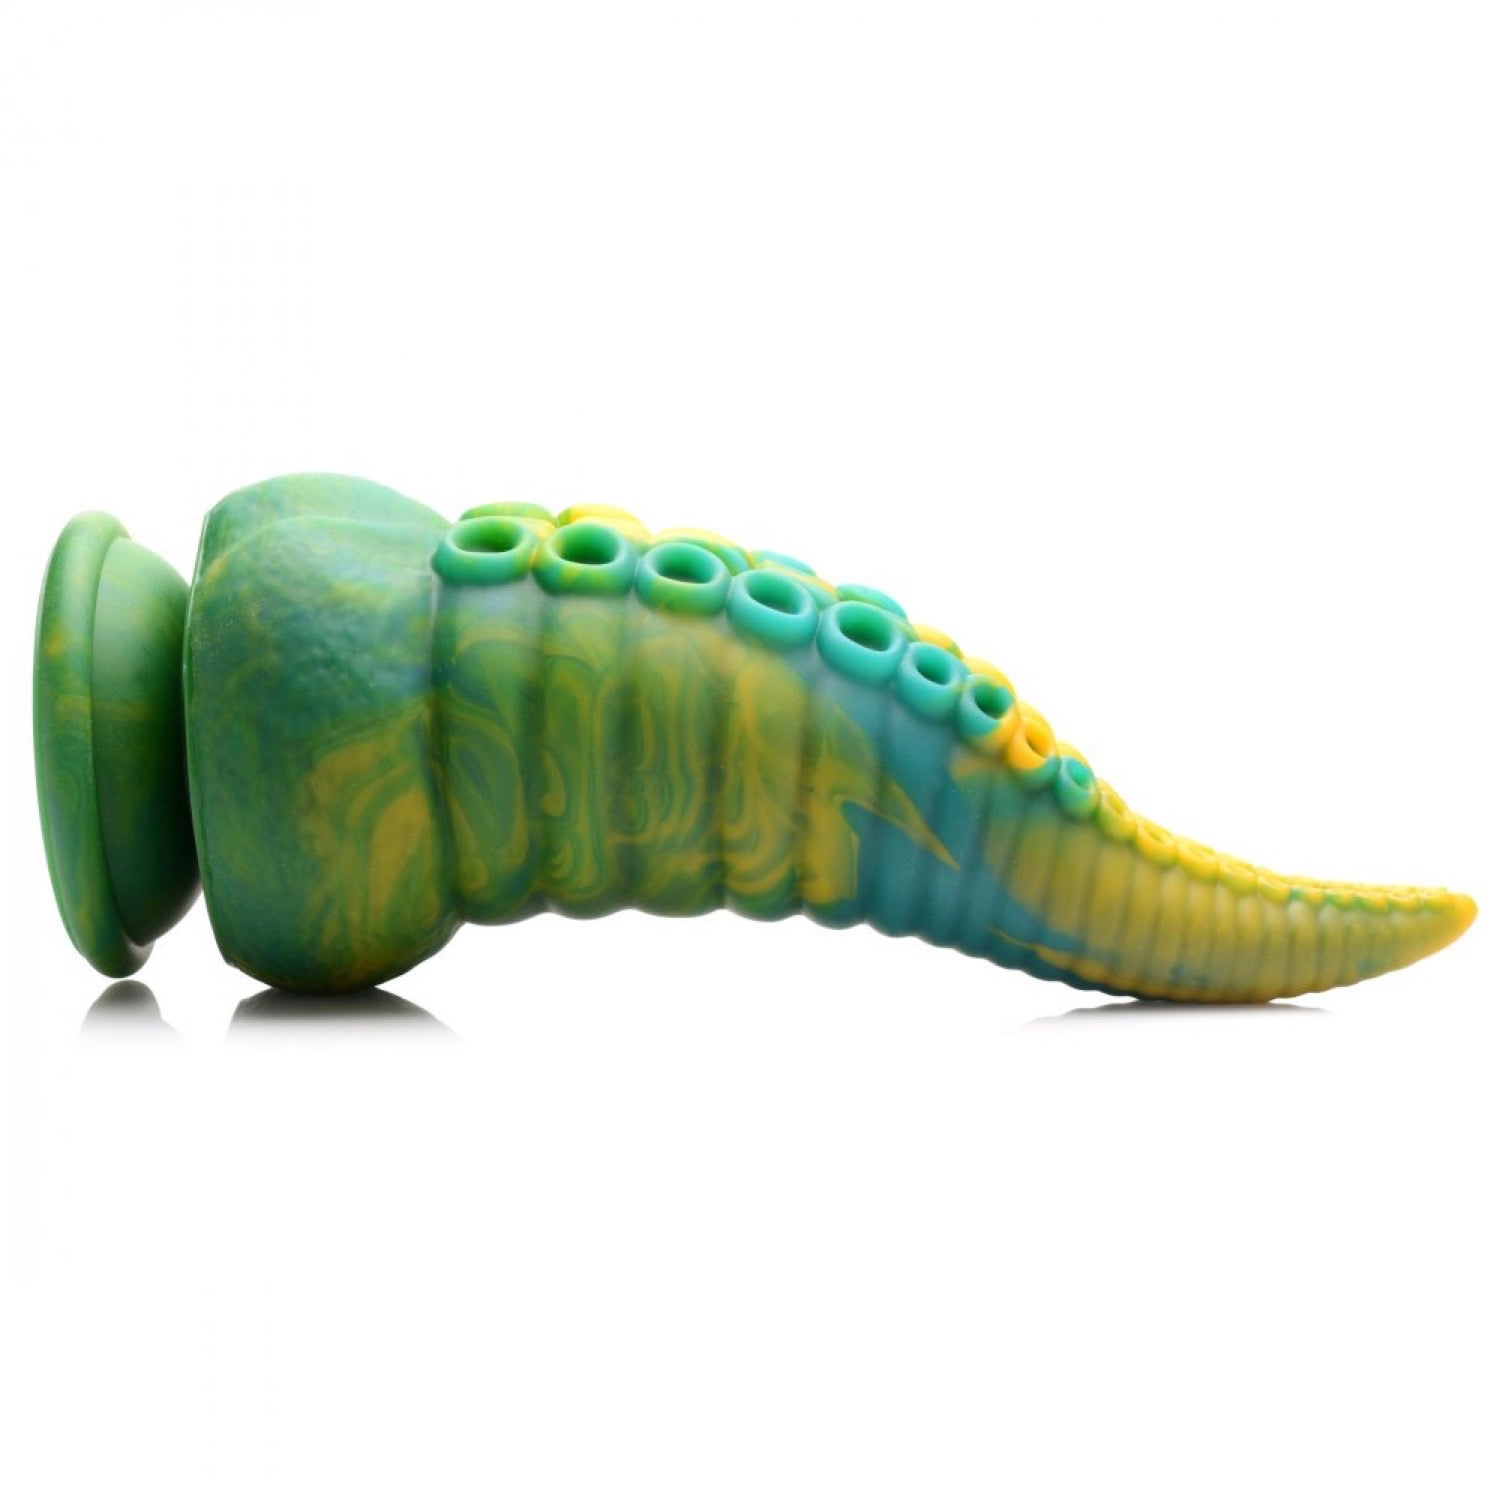 Creature Cocks Monstropus Tentacled Monster Silicone 8.5&quot; Dildo by XR Brands